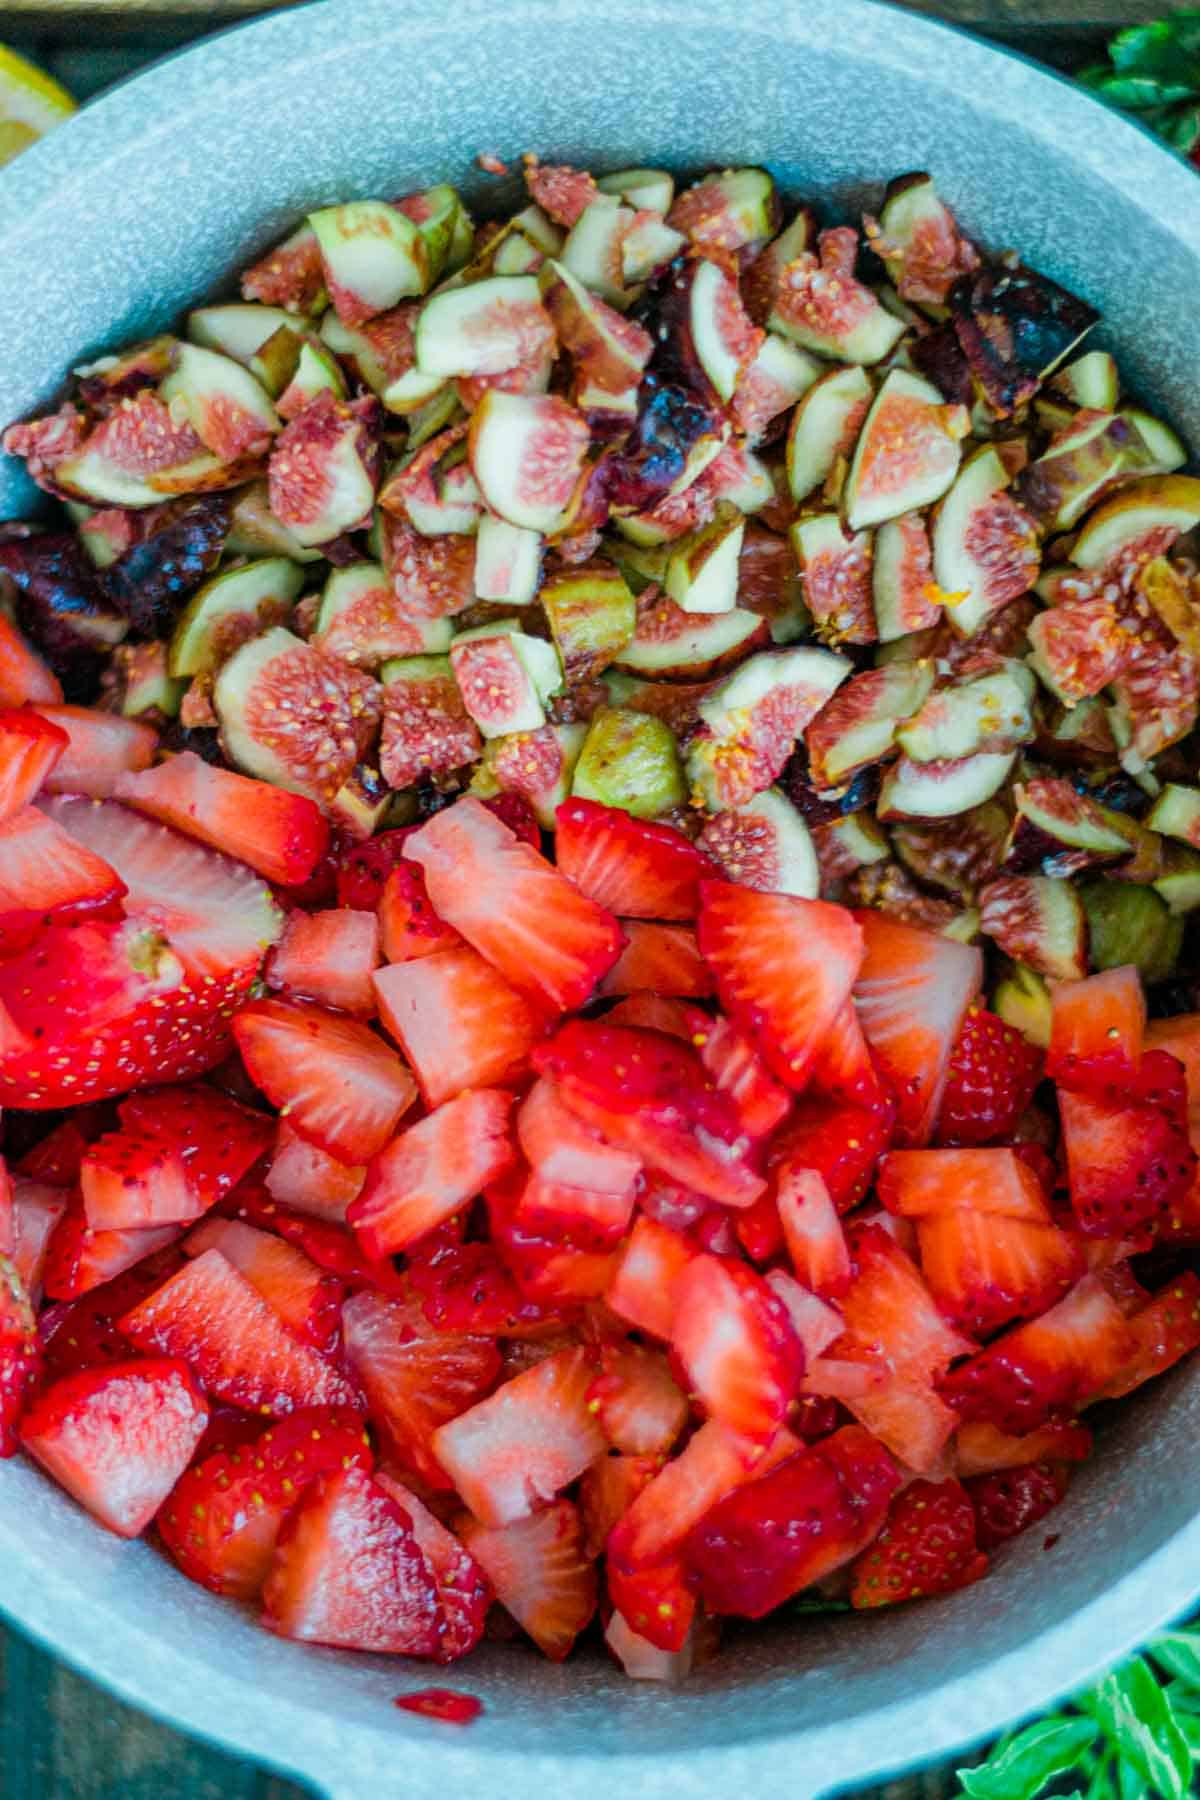 chopped-Strawberries-and-figs-in-sauce-pan-for-strawberry-fig-preserves-recipe